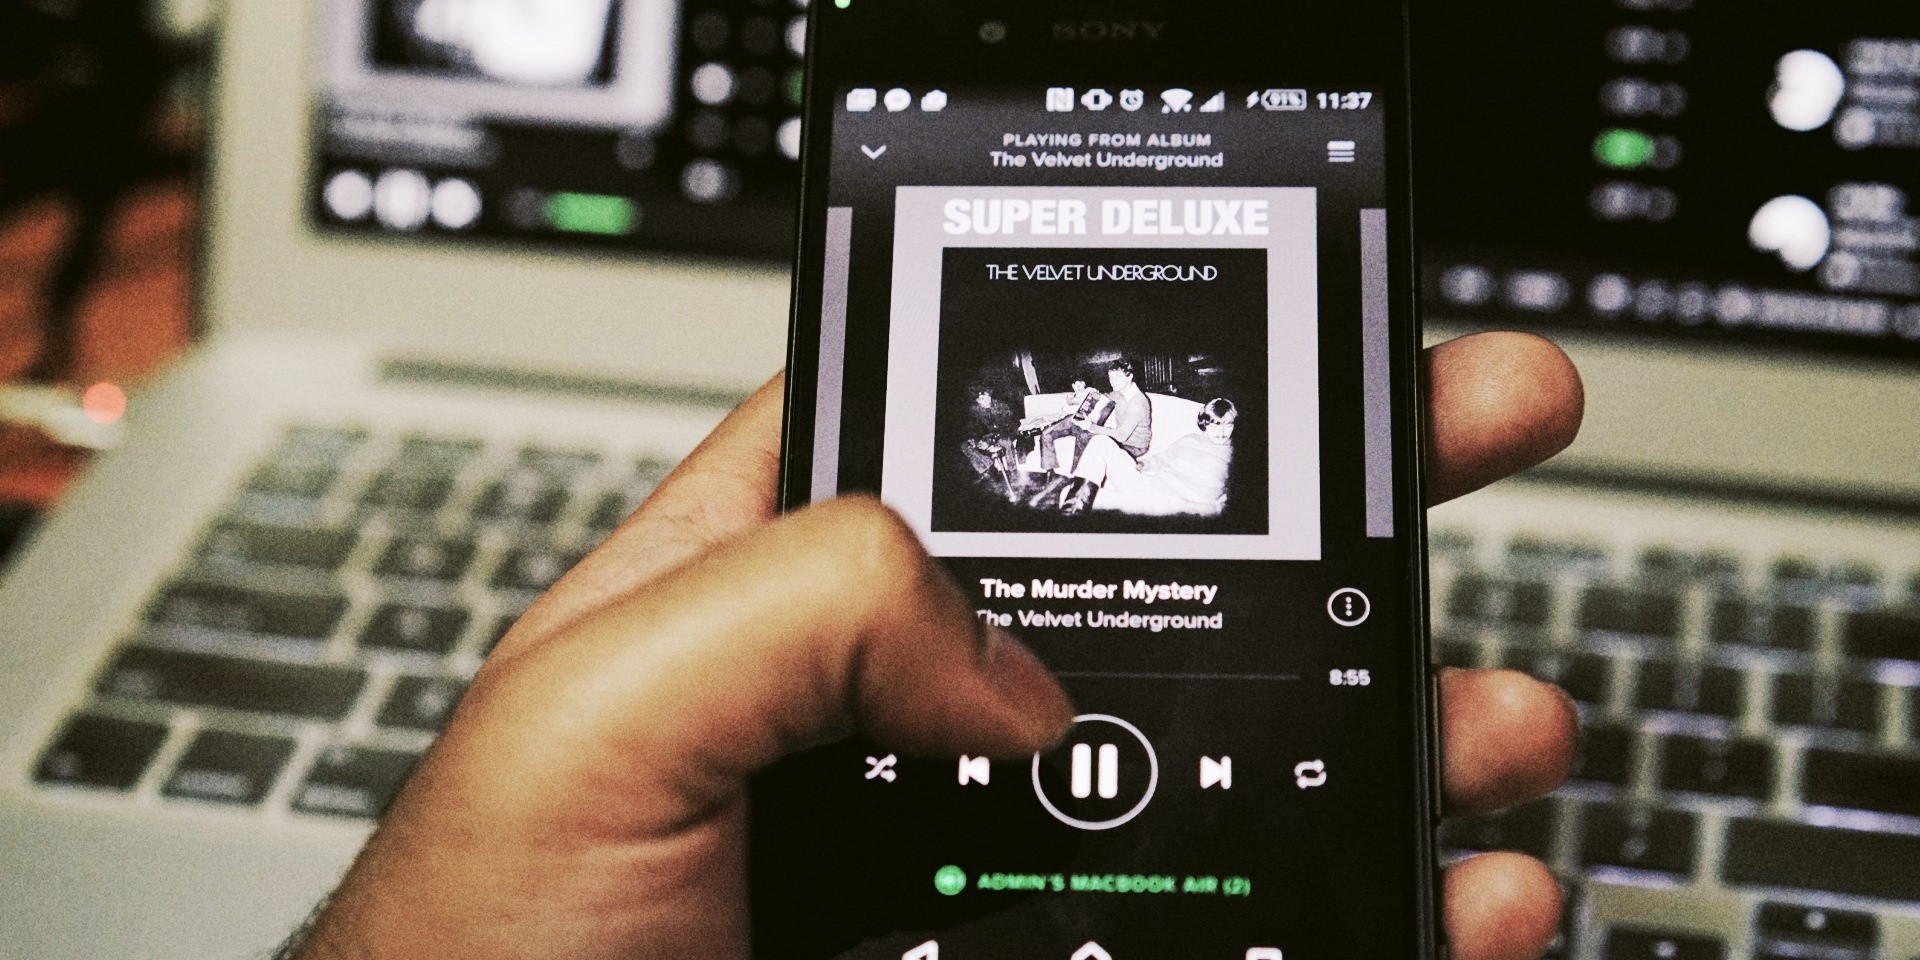 You can now stream Spotify without data charges on Singtel